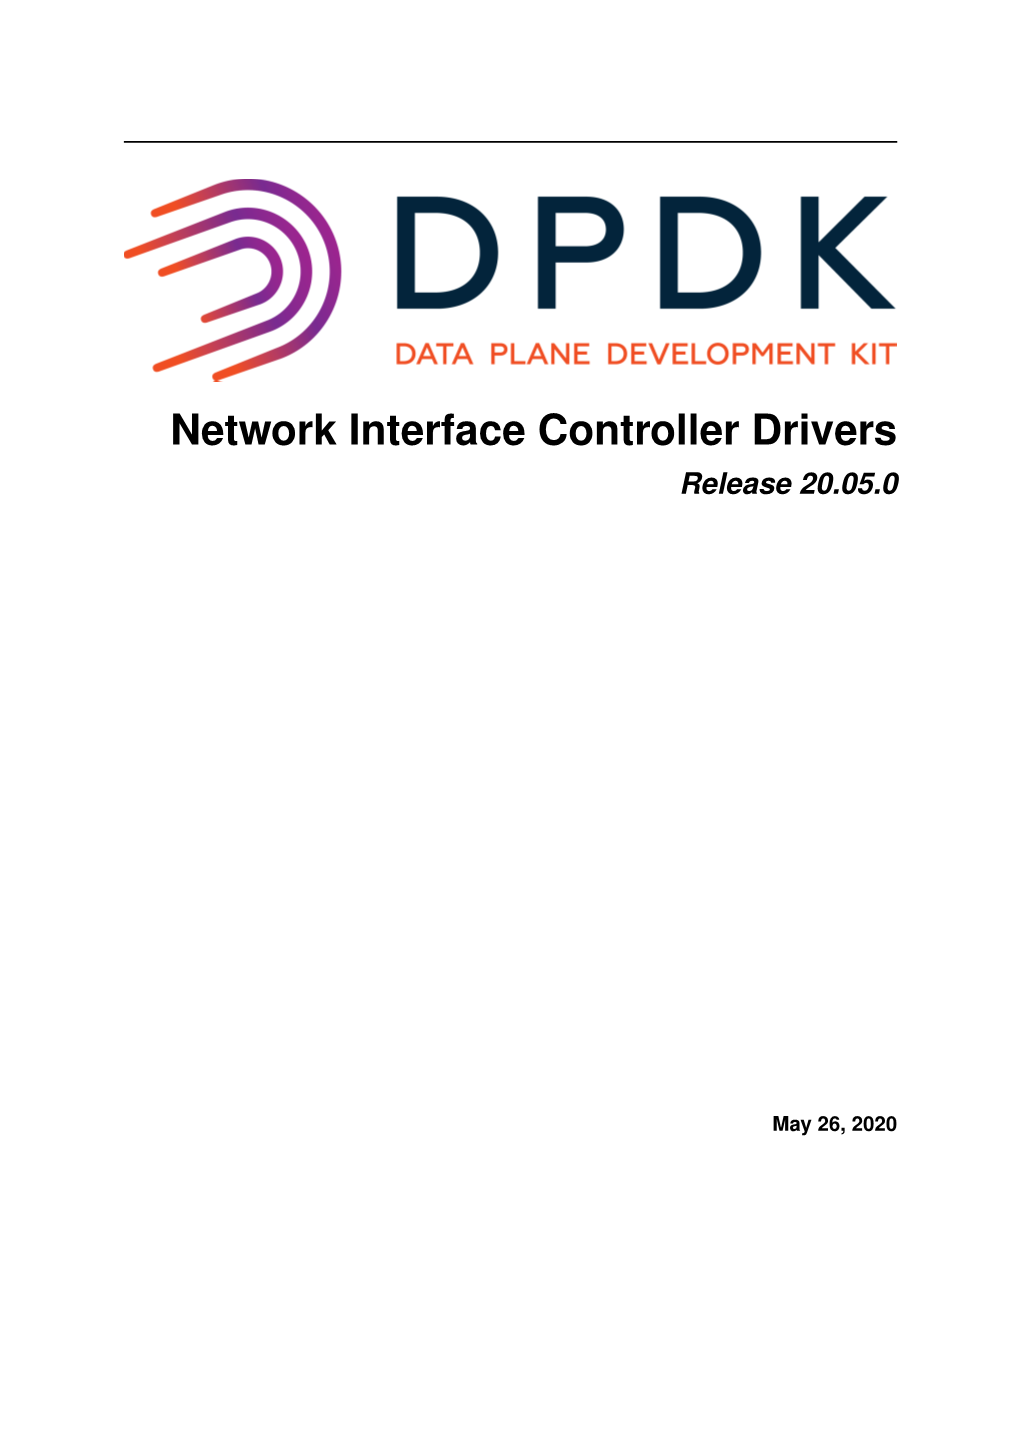 Network Interface Controller Drivers Release 20.05.0